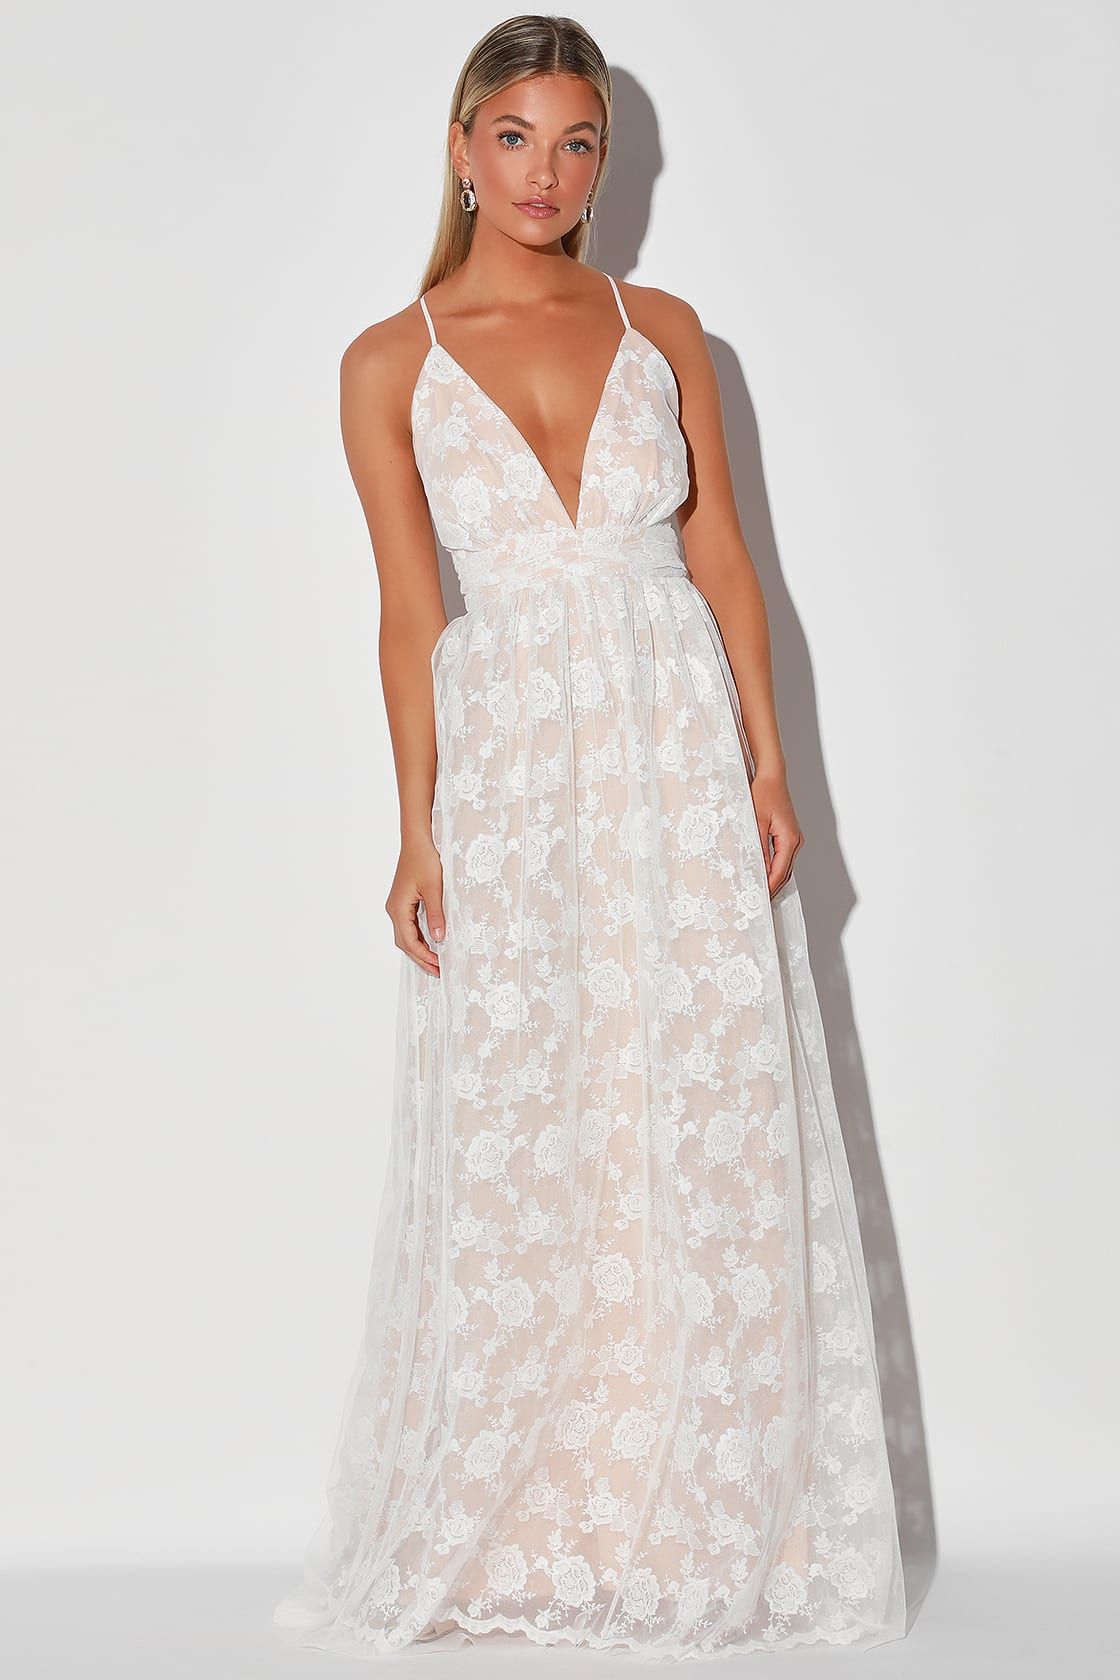 Ivywood White and Beige Embroidered Lace Backless Maxi Dress | Lulus